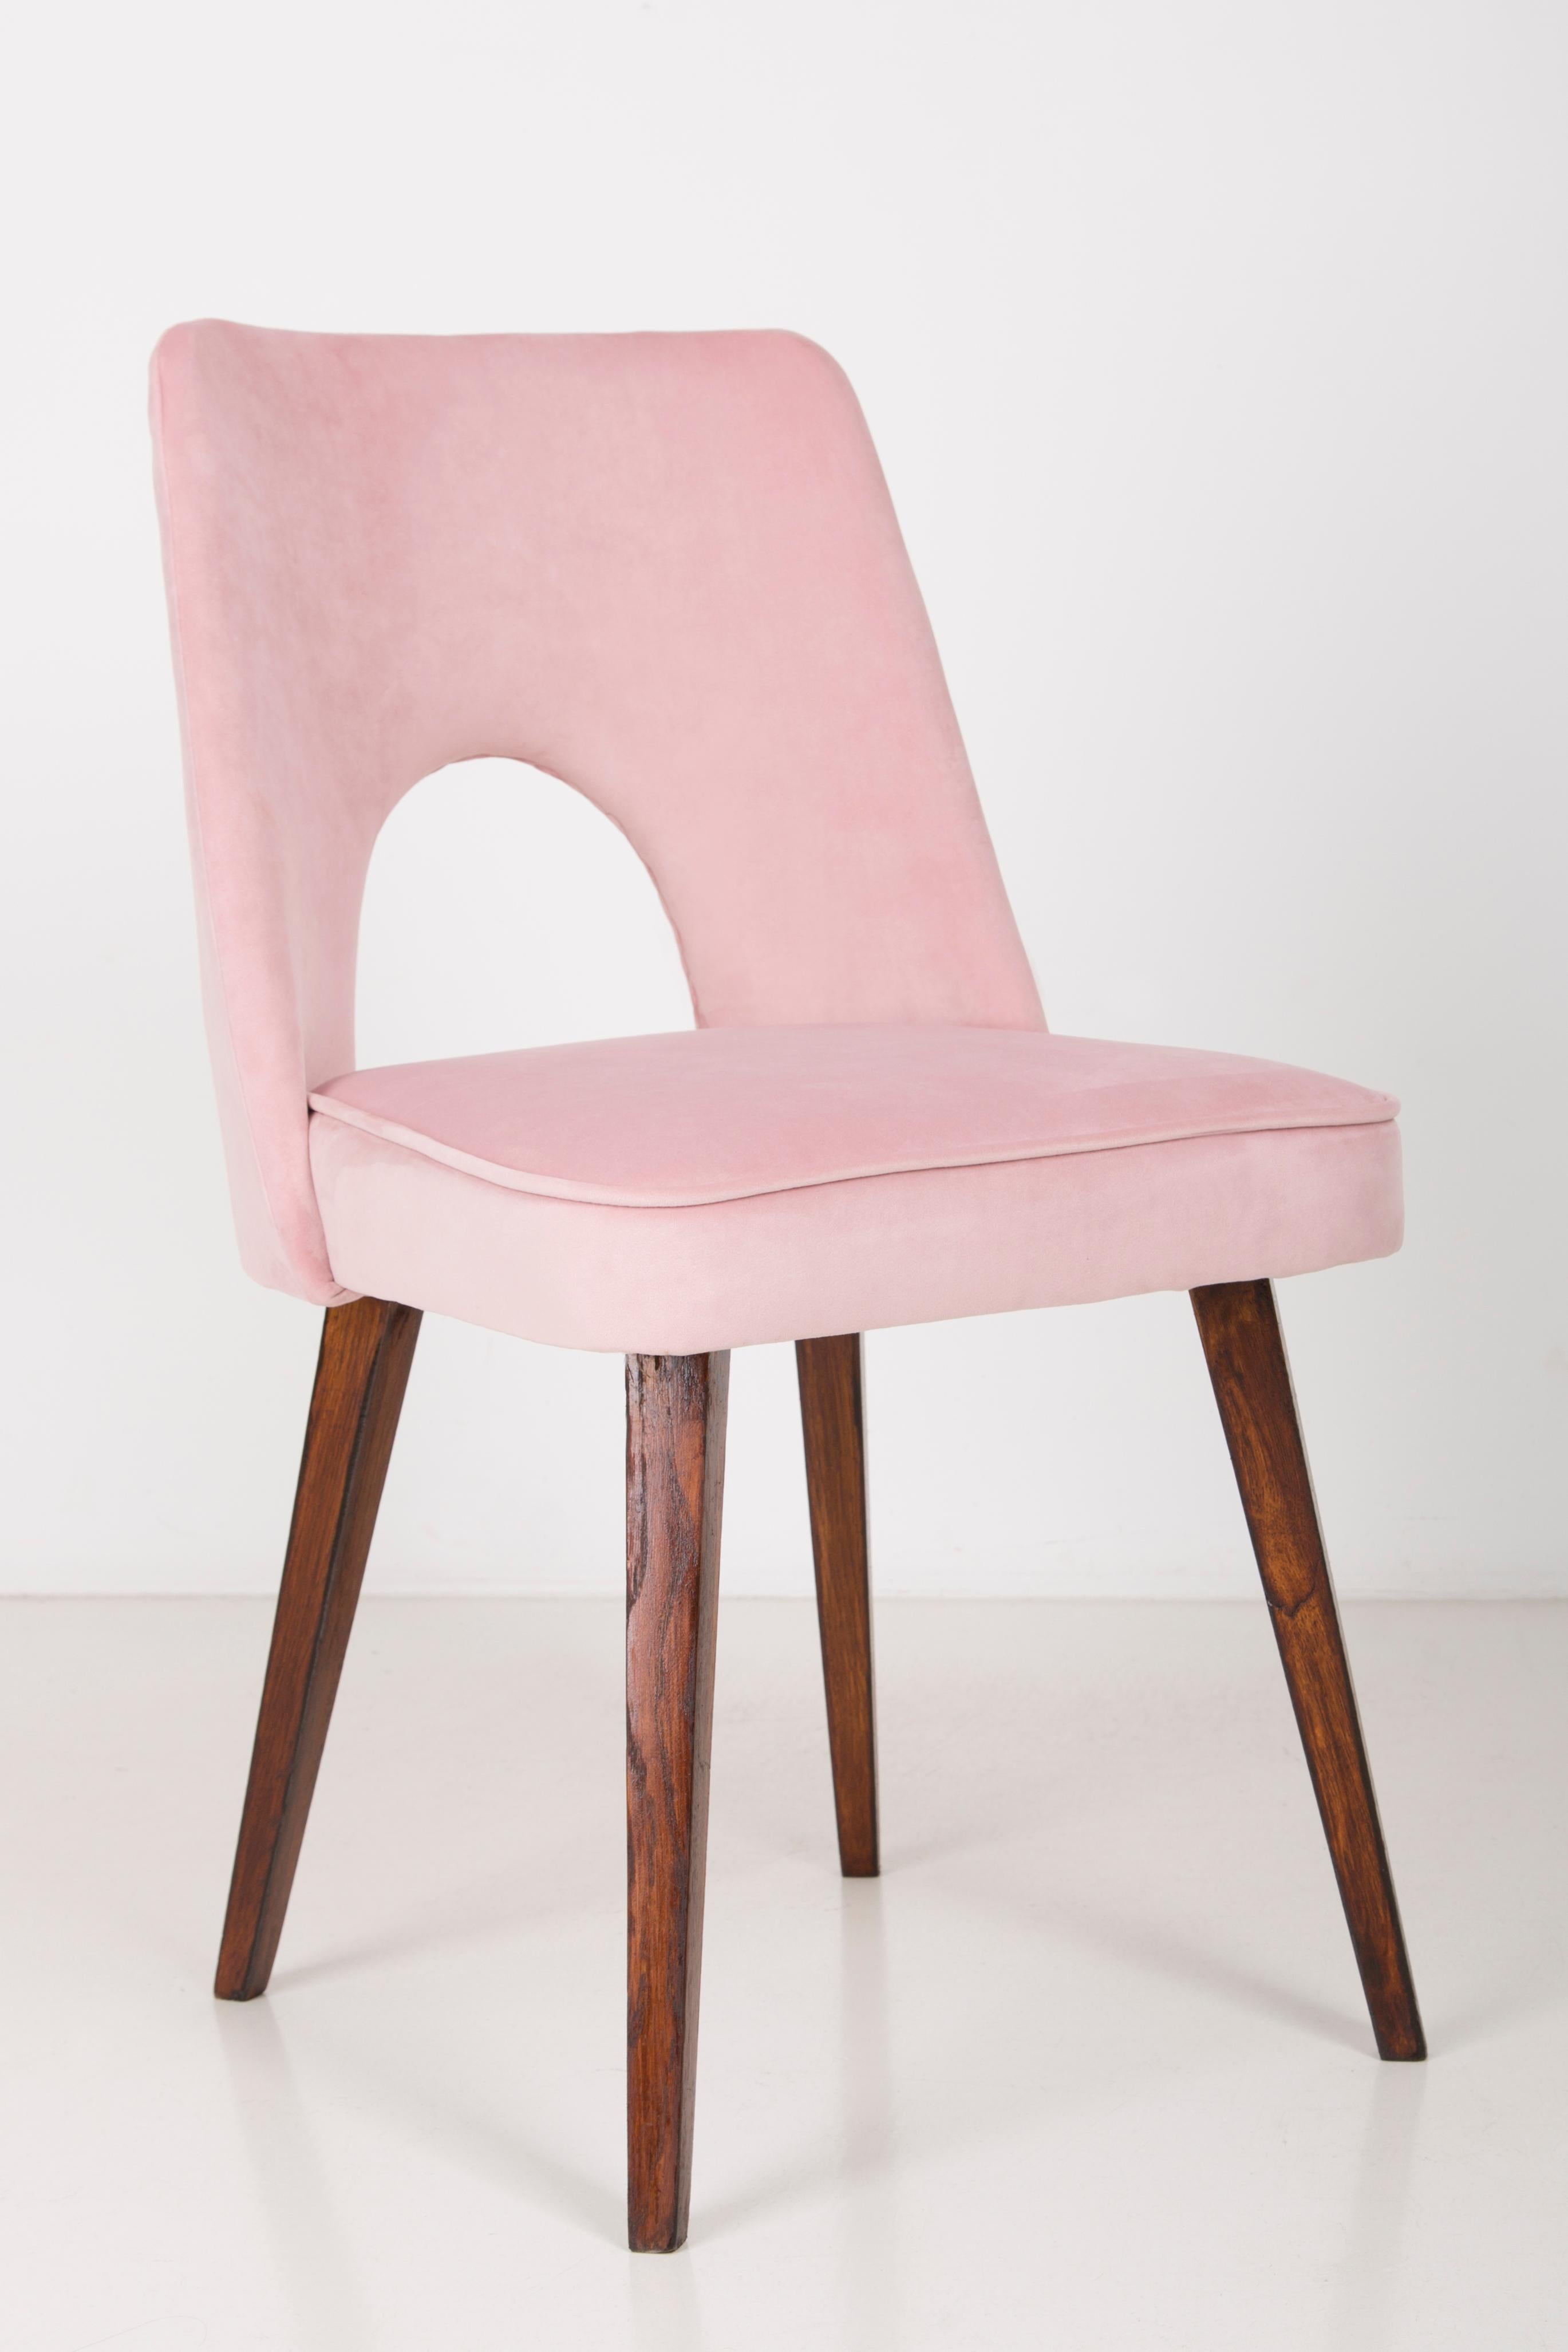 baby pink chairs